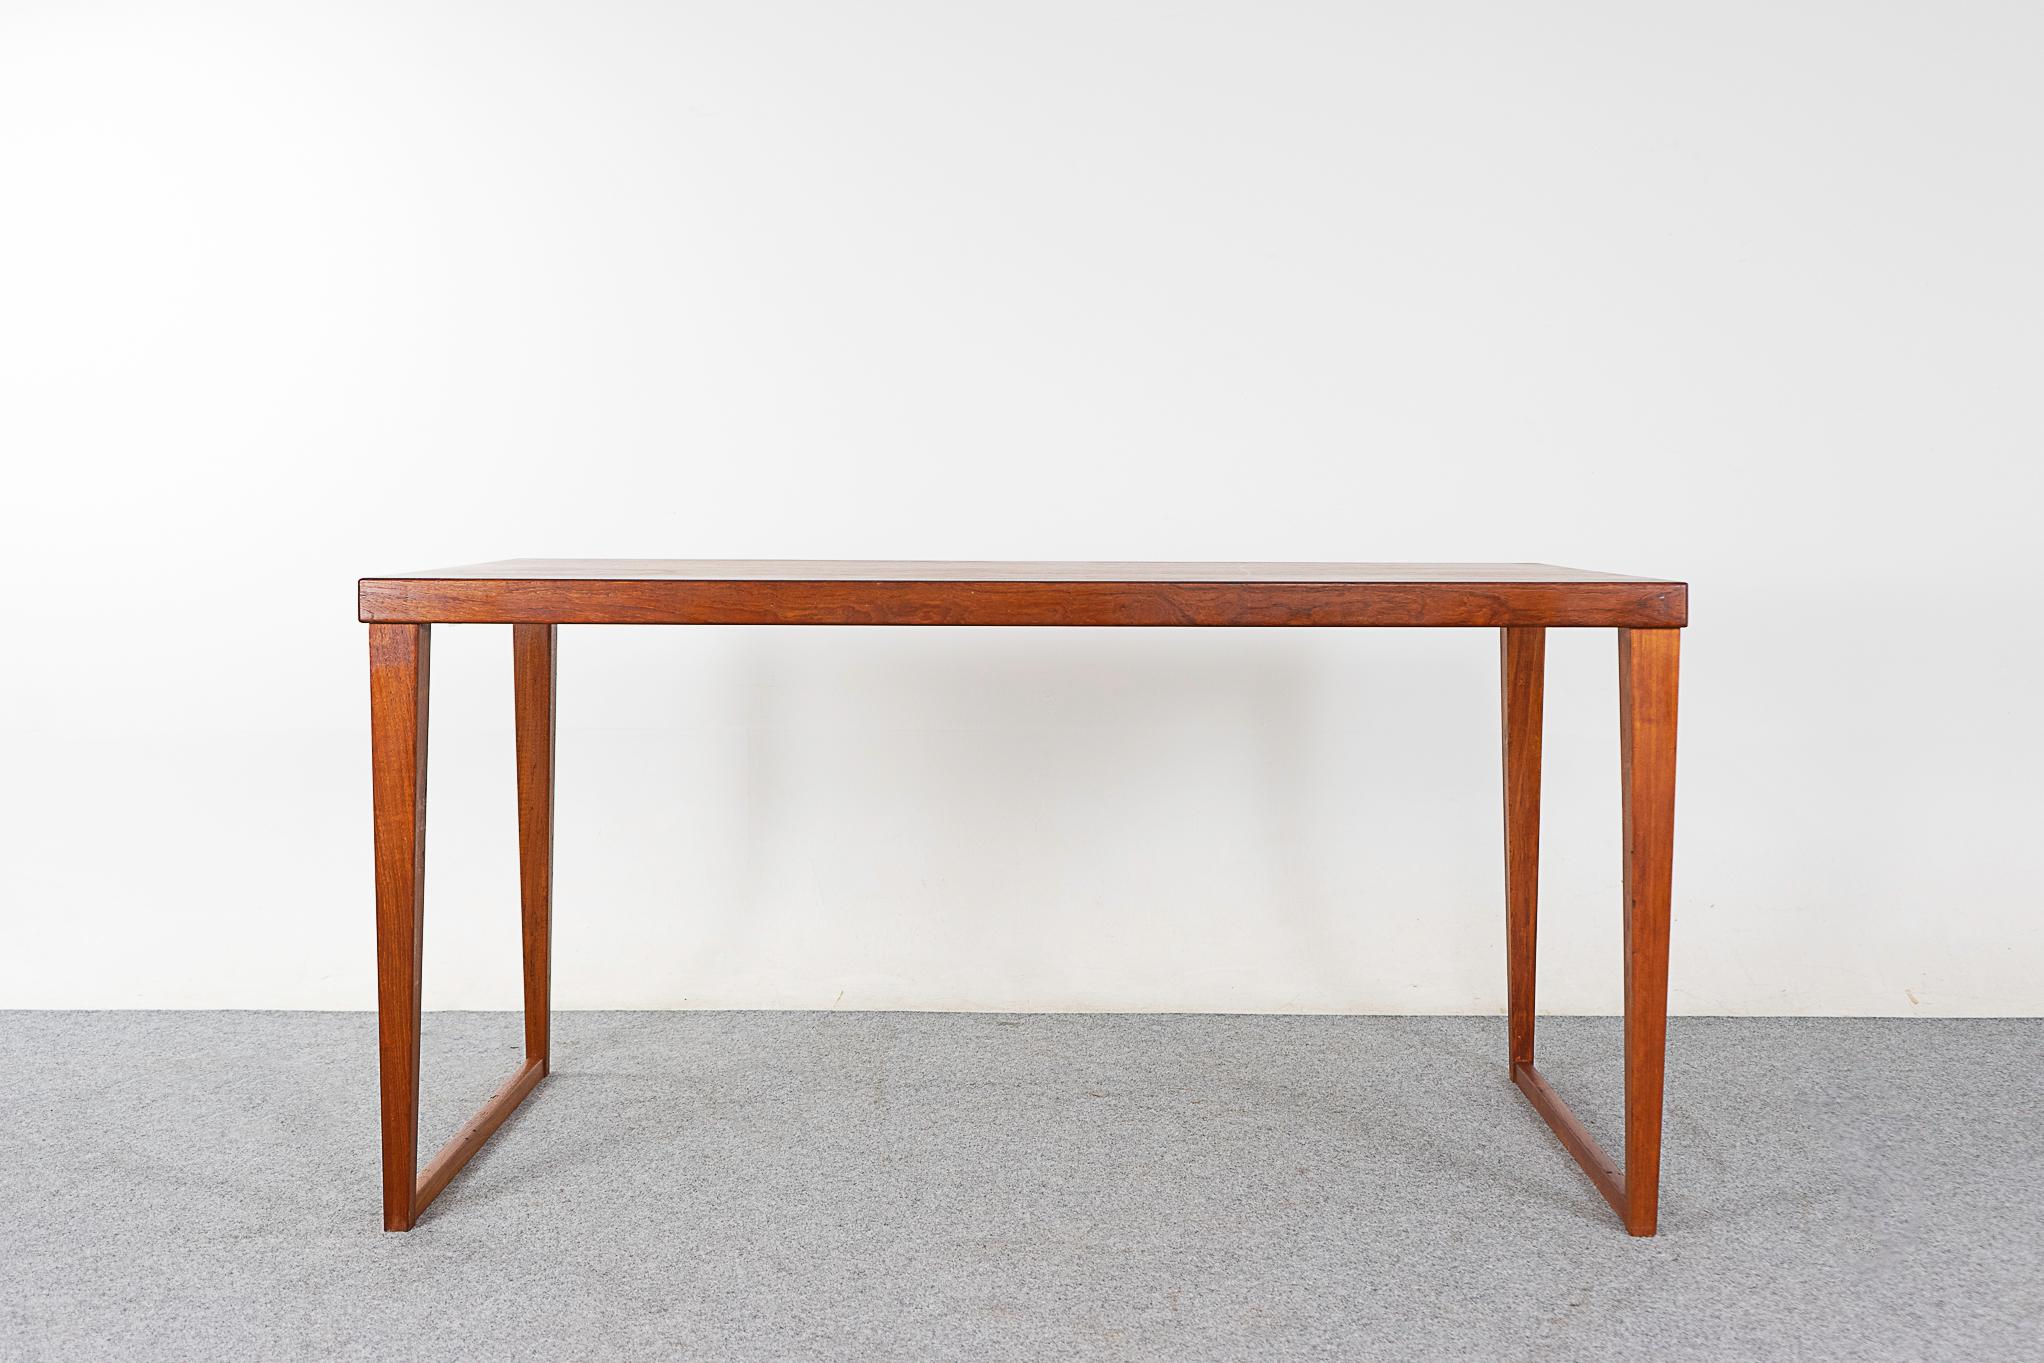 Teak mid-century desk/table, circa 1960's. Unique piece, perfect for the dining room or office, double duty! Striking silhouette with angled base.

Please inquire for remote and international shipping rates.